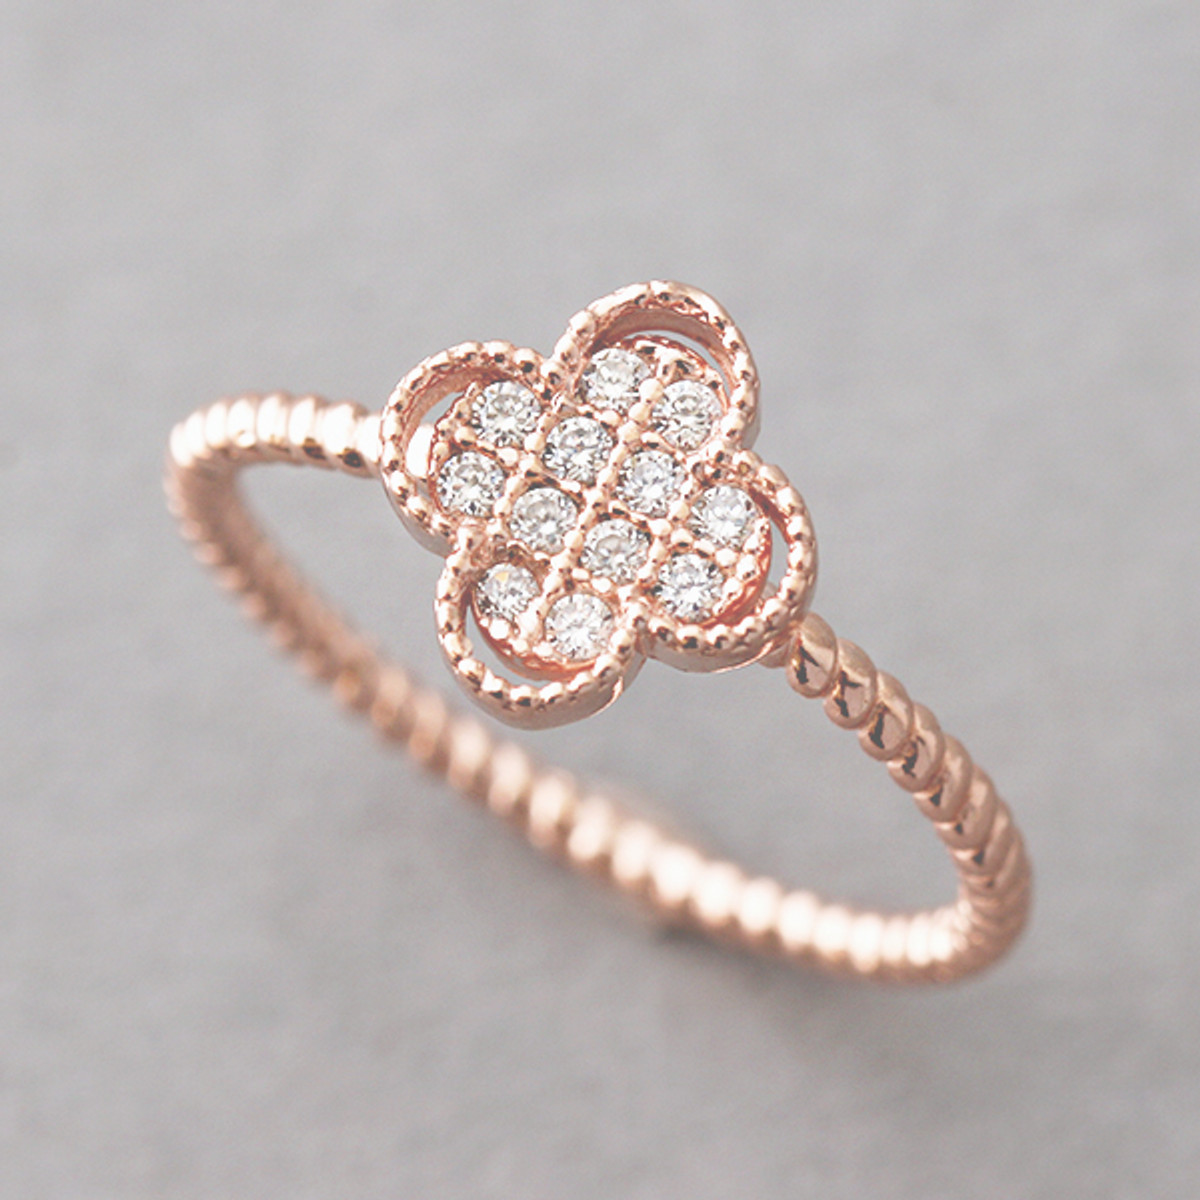 Four Leaf Clover Ring Sizes 5-10 925 Sterling Silver Or Yellow Rose Gold  Finish